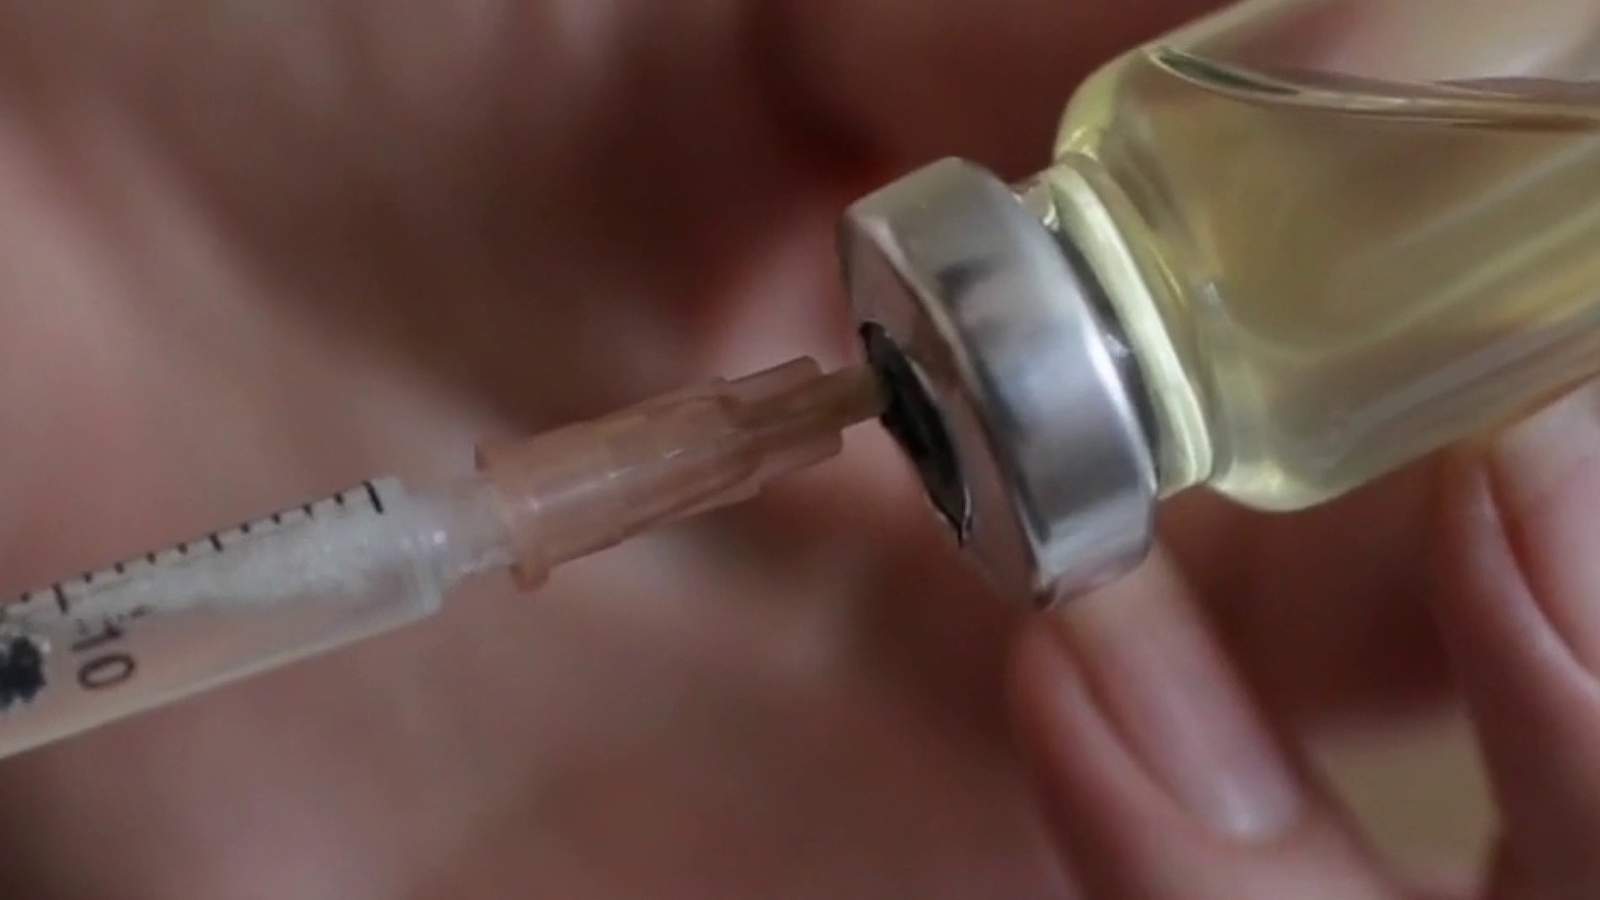 Metro Health to use mass flu shot clinics as ‘pilot test’ for COVID-19 vaccine rollout